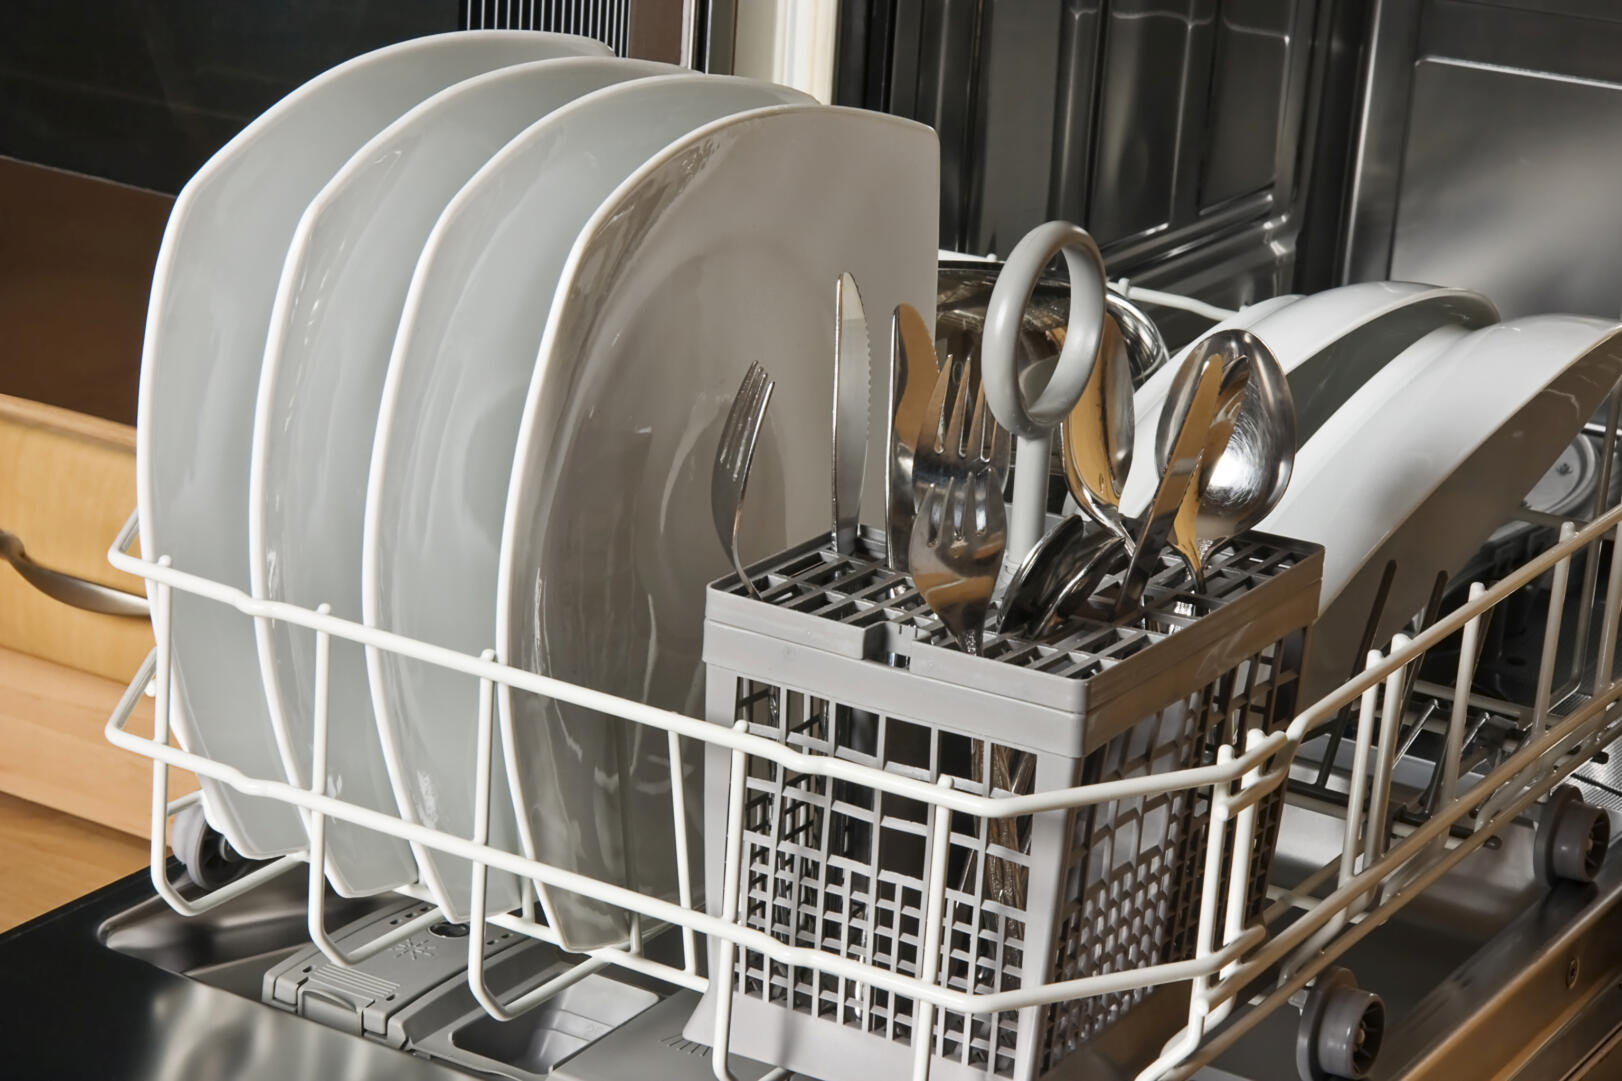 Dishwasher with clean white plates